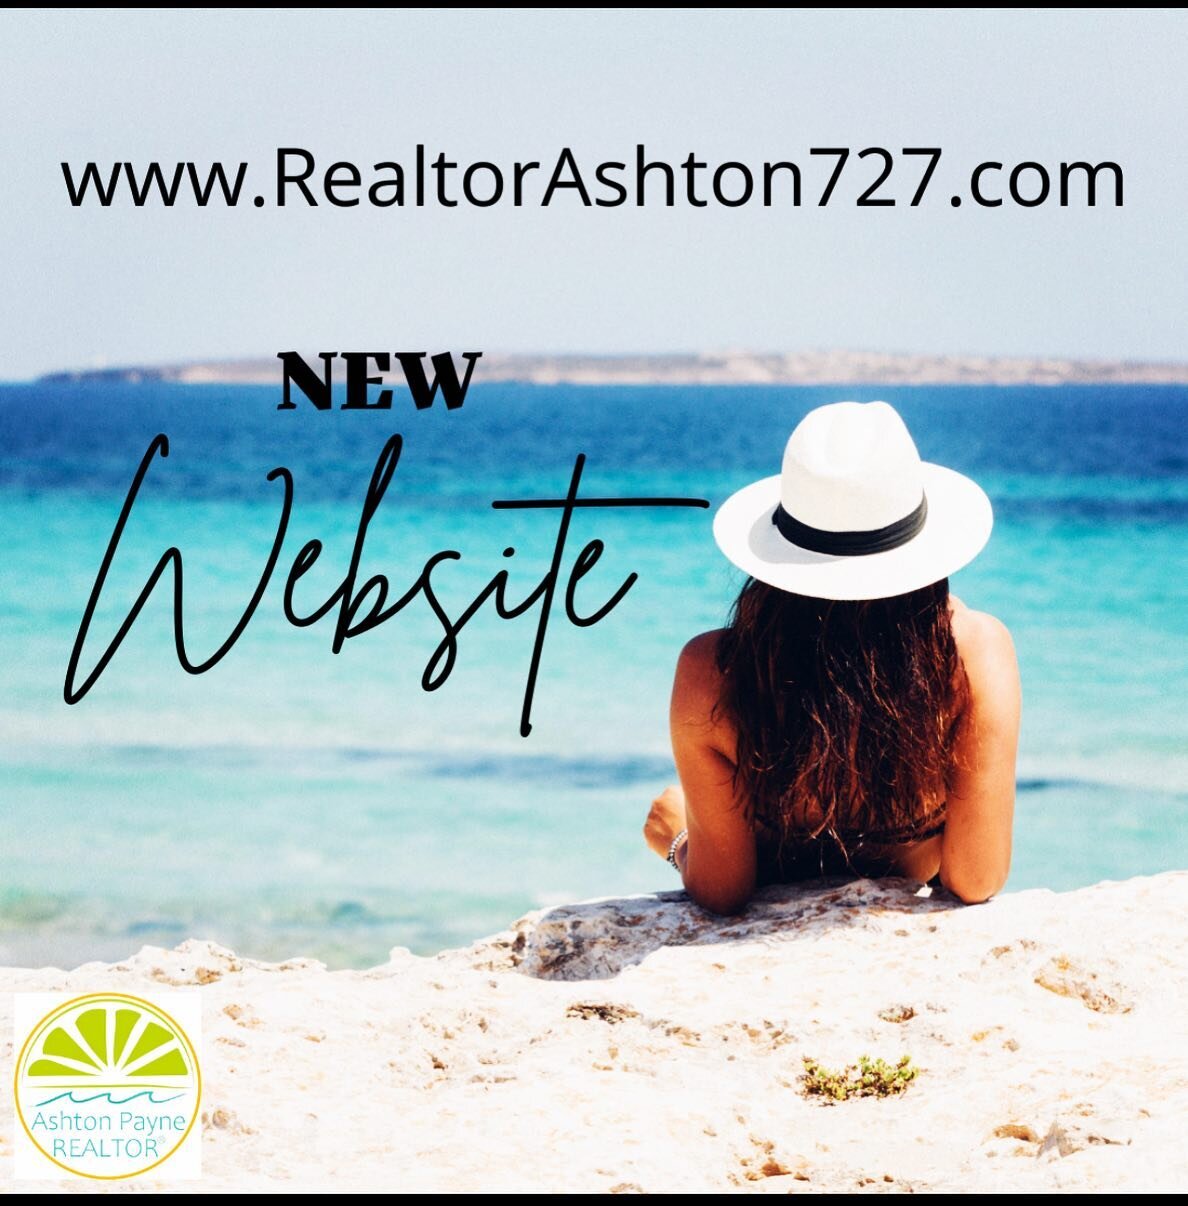 Starting Spring off right with a new website. Let me know what you think! www.RealtorAshton727.com